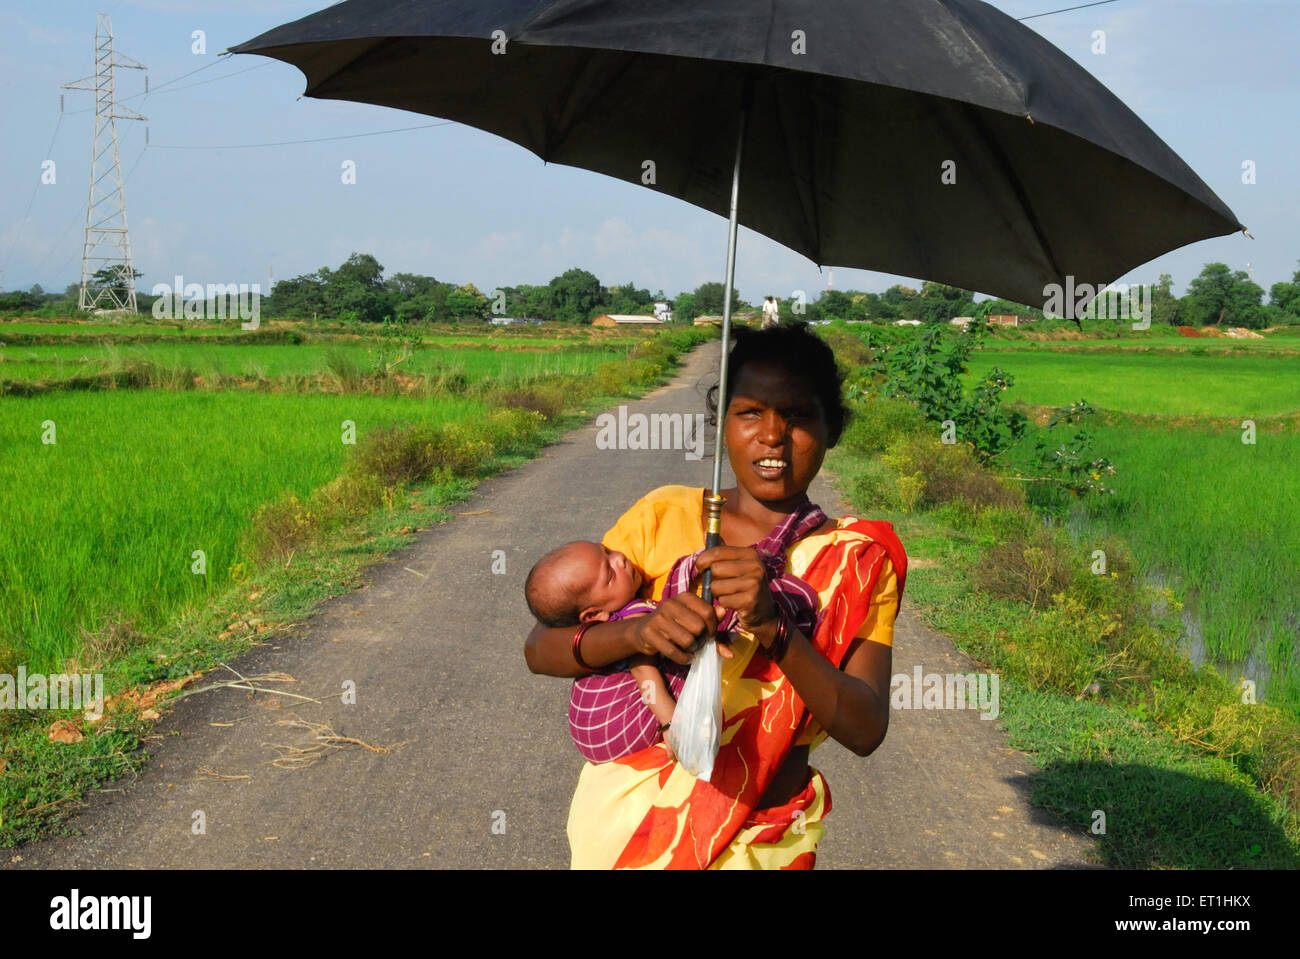 Ho tribes woman carrying child in cloth bag tied ; Chakradharpur ; Jharkhand ; India NO MR Stock Photo